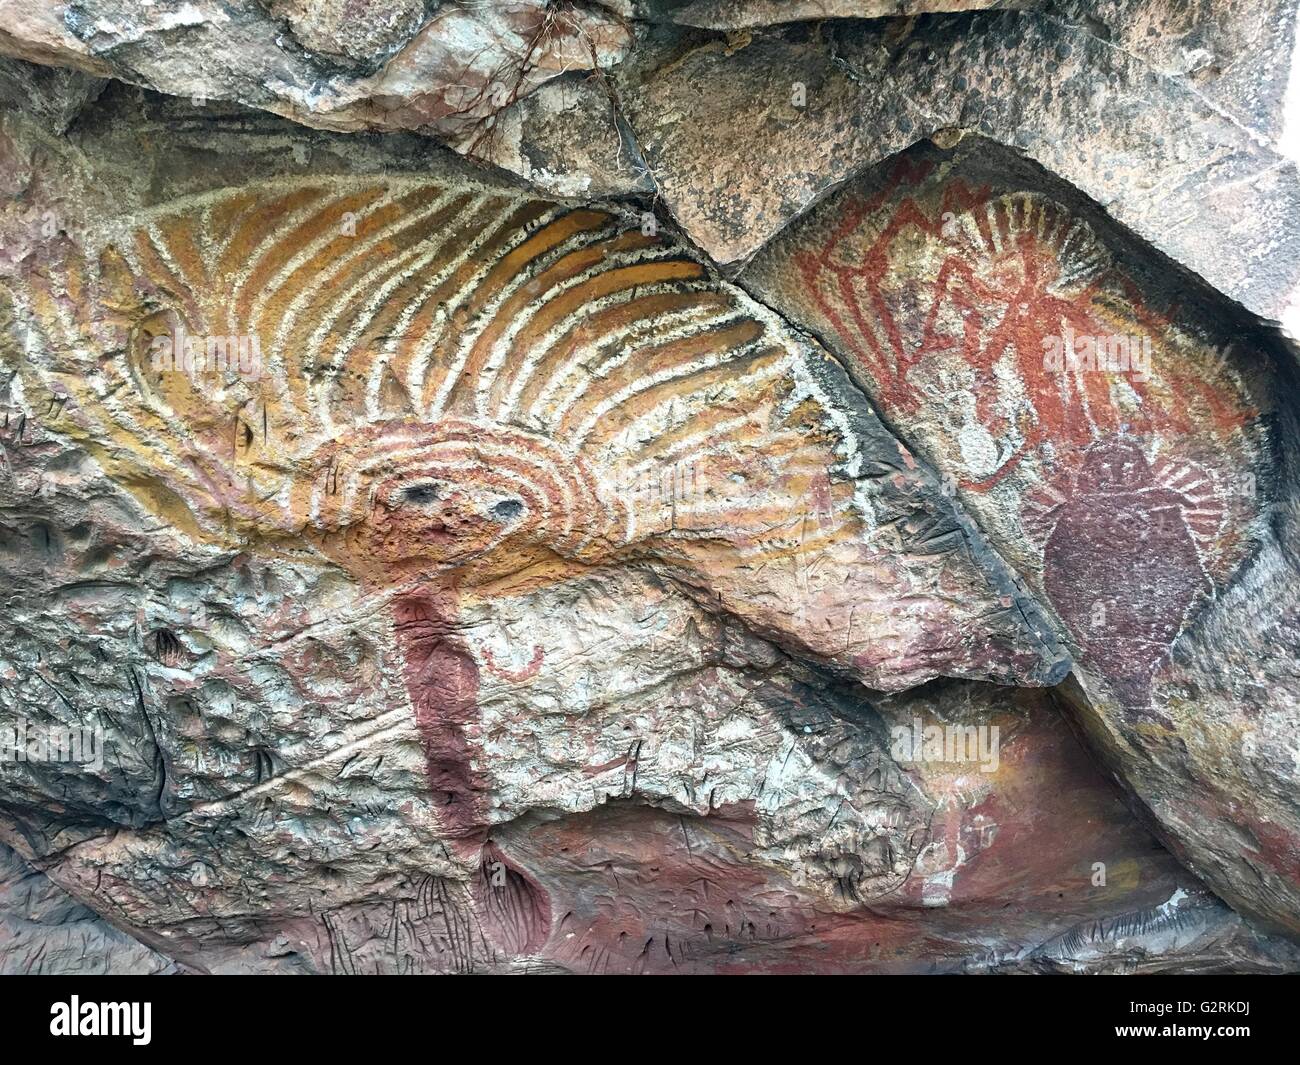 Wardaman paintings known as 'Moon Dreaming' near Judbarra /Gregory National Park, Northern Territory, Australia featured on NOVA with Bill Harney Stock Photo